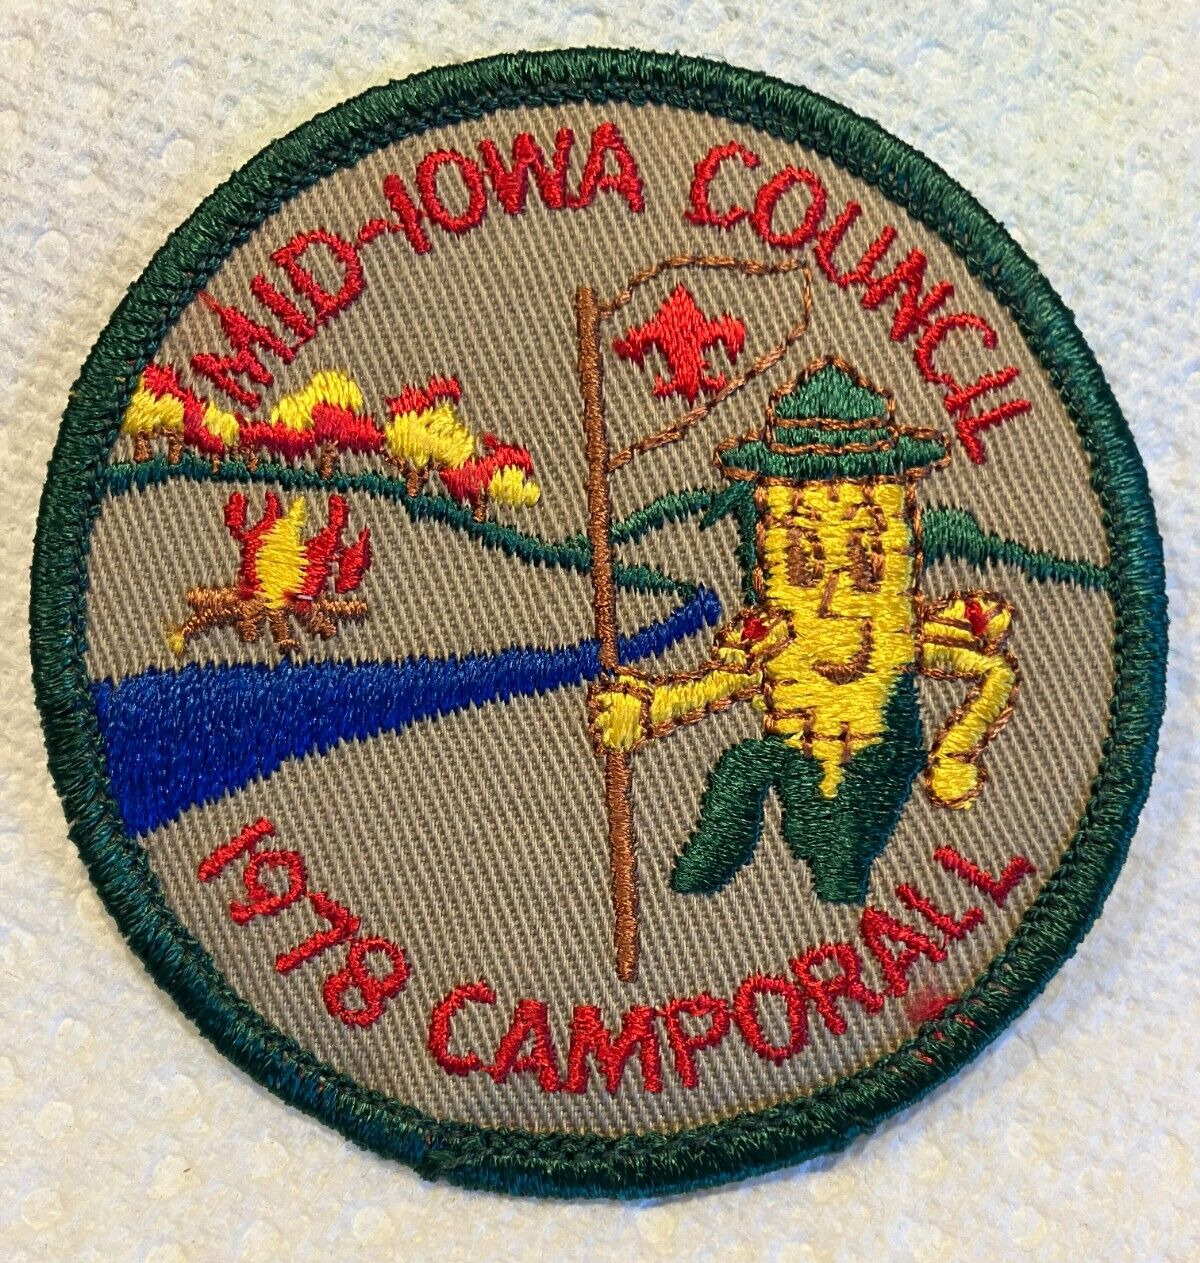 1978 Mid Iowa Council Camporall Boy Scout Patch Campfire Tan Twill